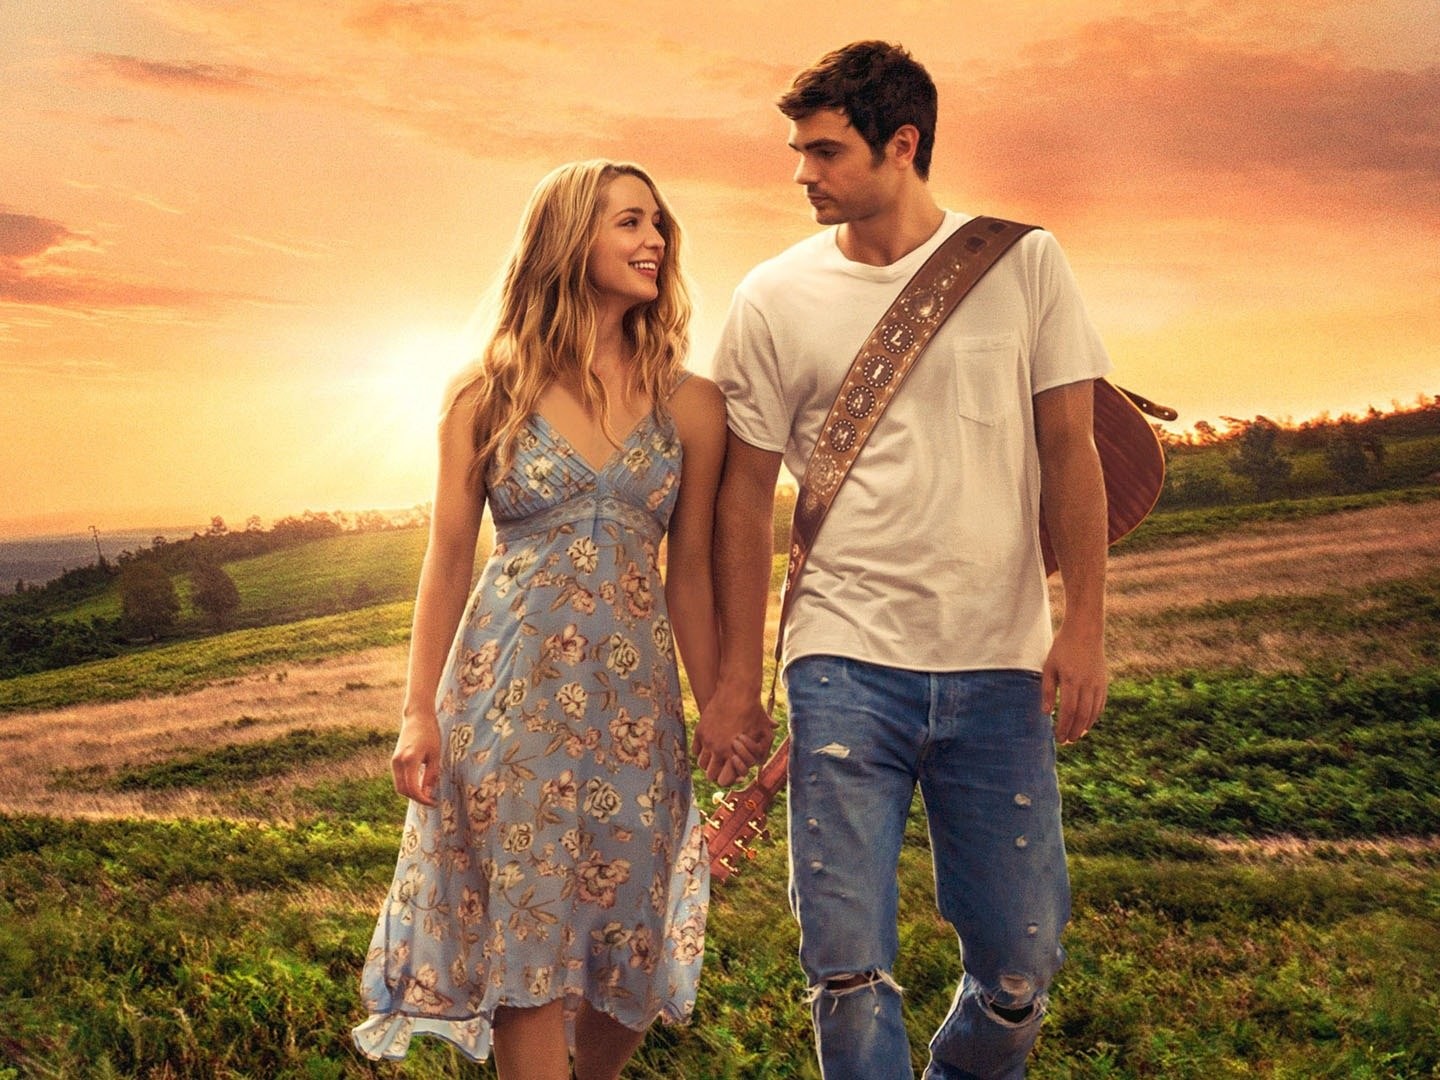 Movie review: 'Forever My Girl' plays like limp country song